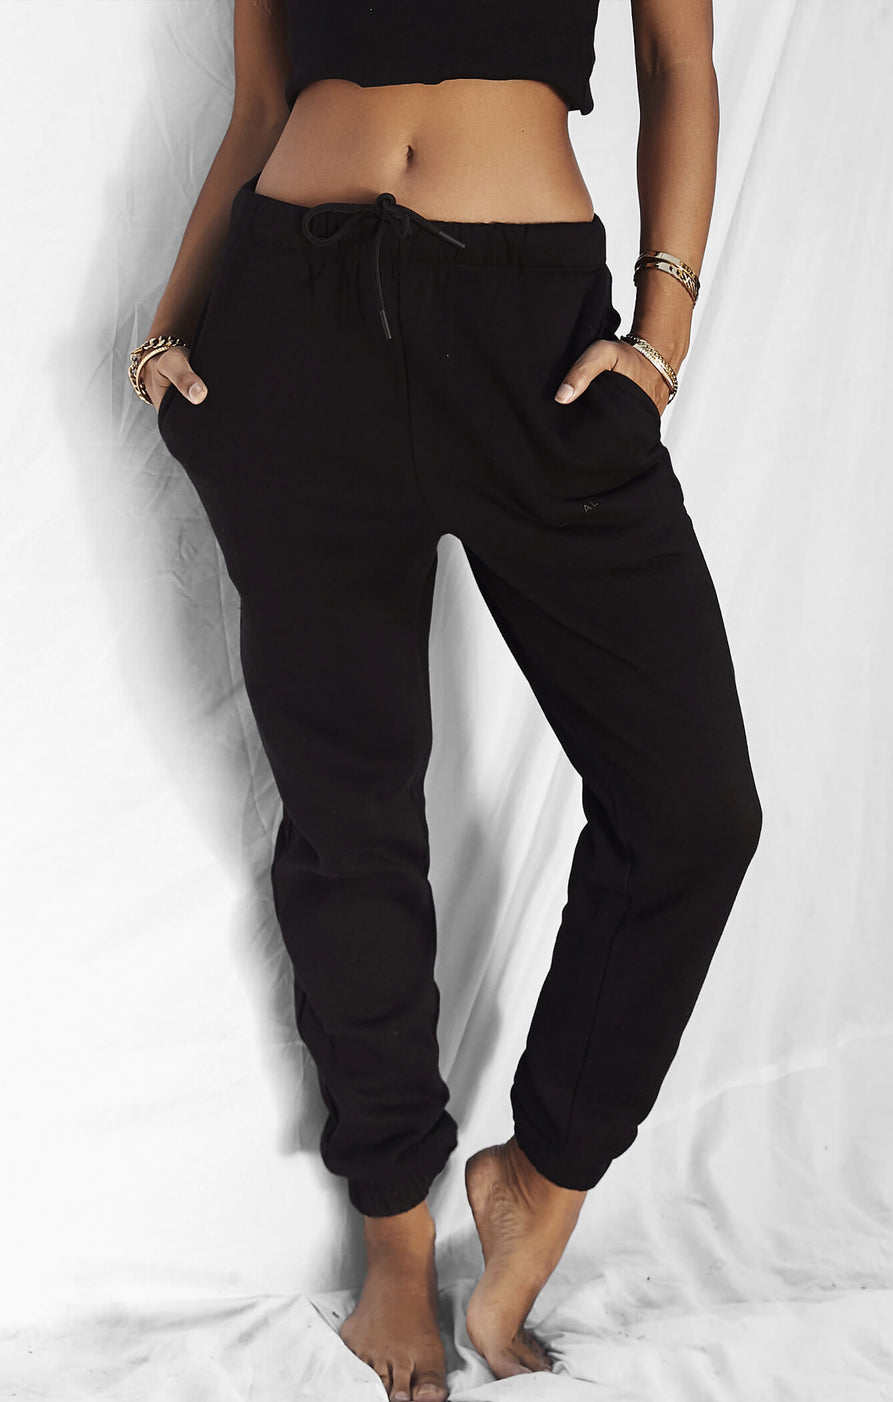 THE A.T.G TRACK PANTS - BLACK